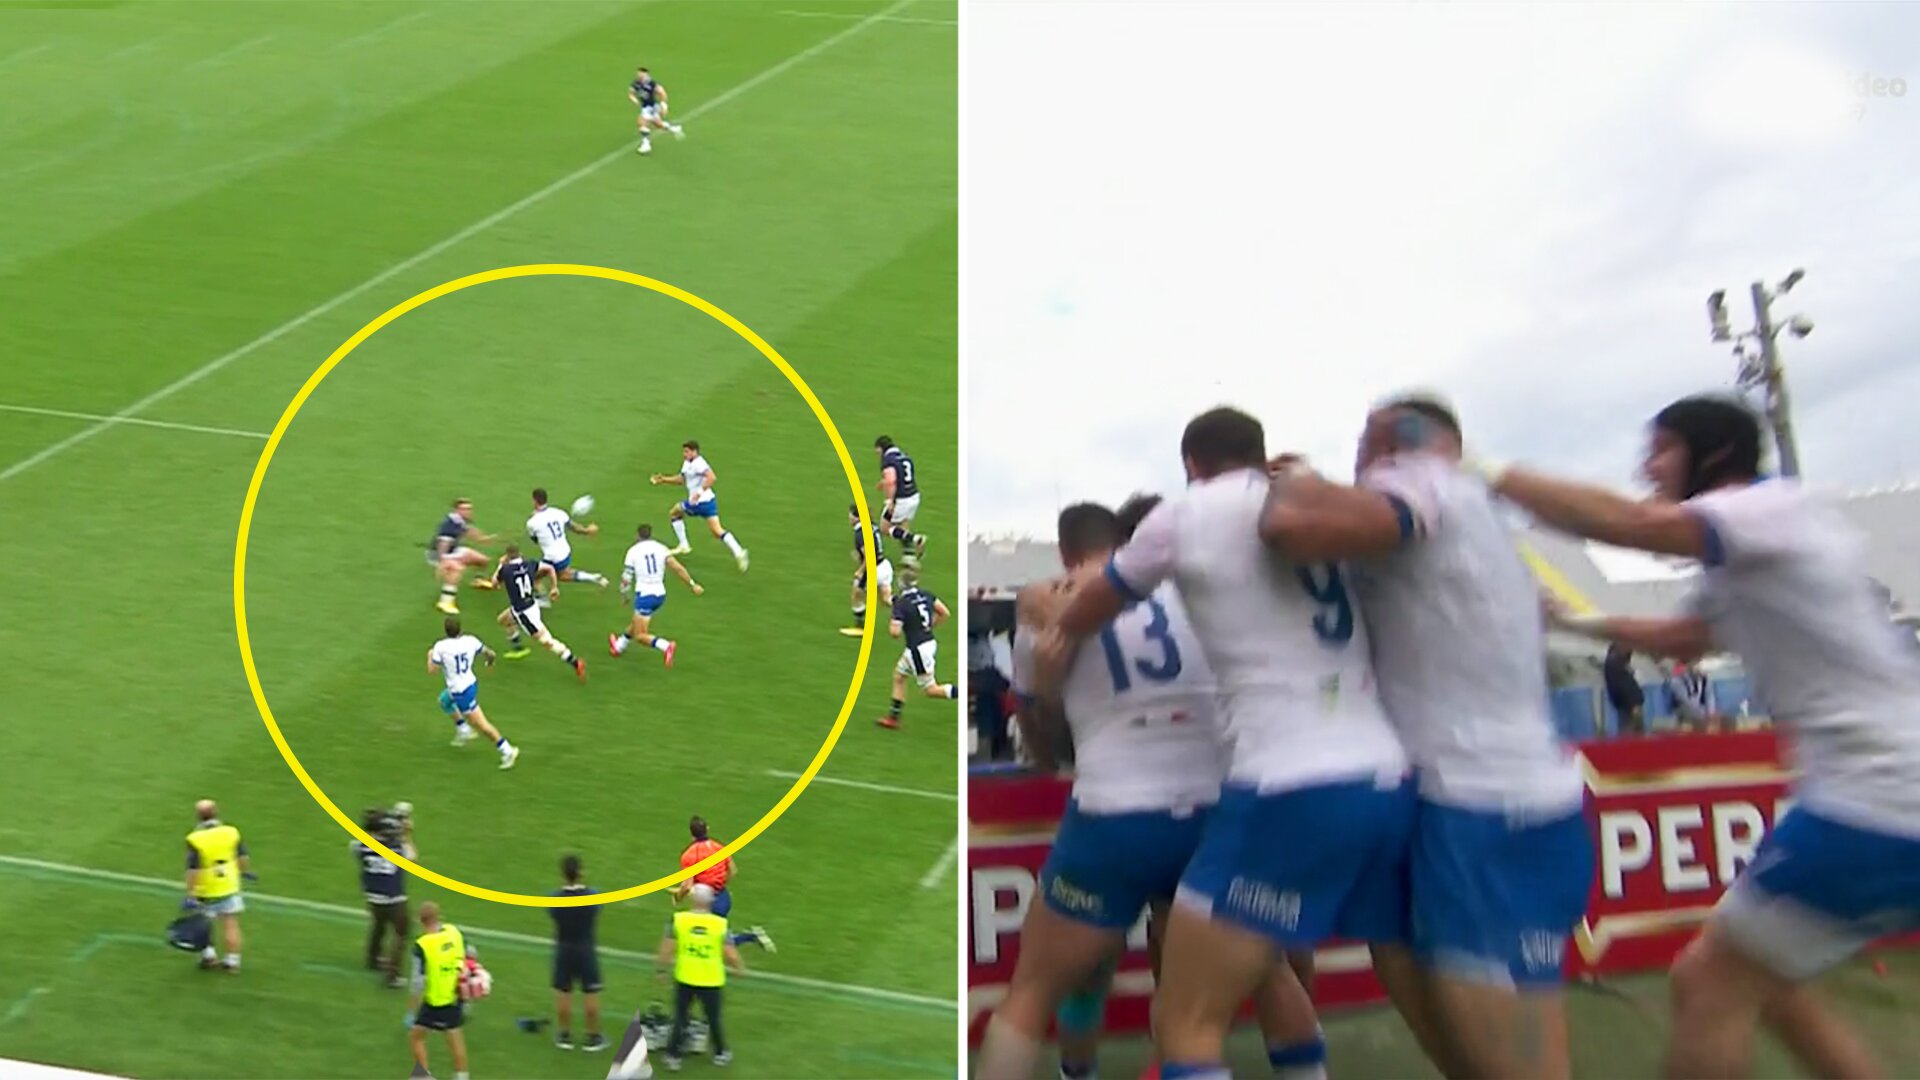 Hell breaks out after Italy score stunning try in frenetic first half of Autumn Nations Cup